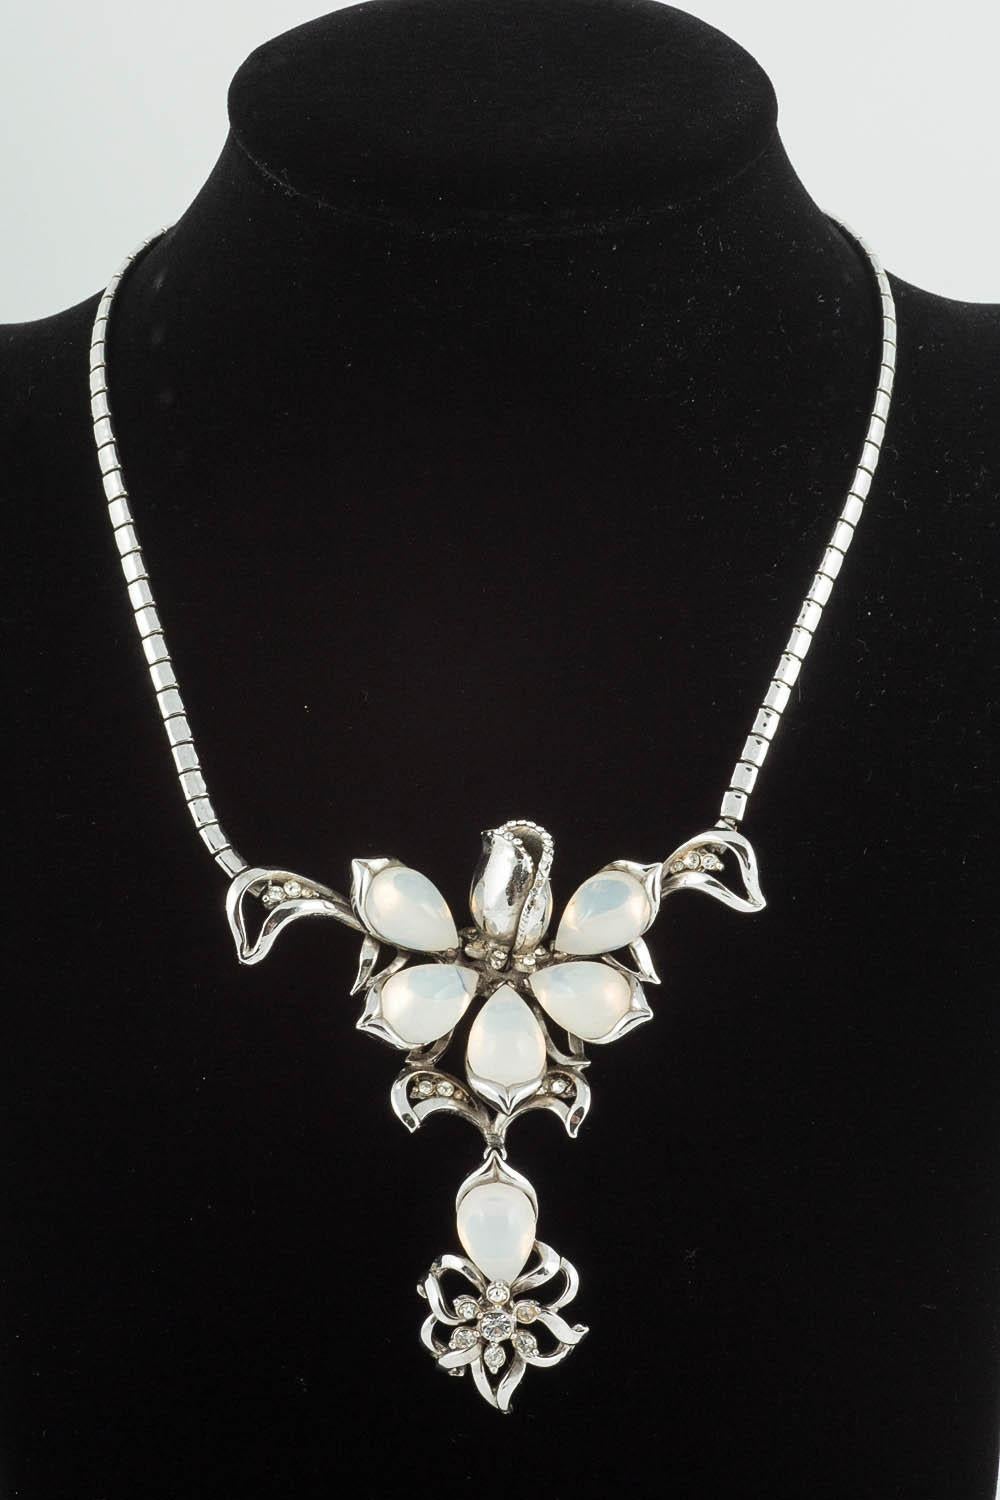 This highly stylised and elegant parure consists of a necklace, brooch, bracelet and matching earrings. Cast and created through the lost wax process, this gives grater clarity and sharpness to the design, which is of a stylised flowerhead, the